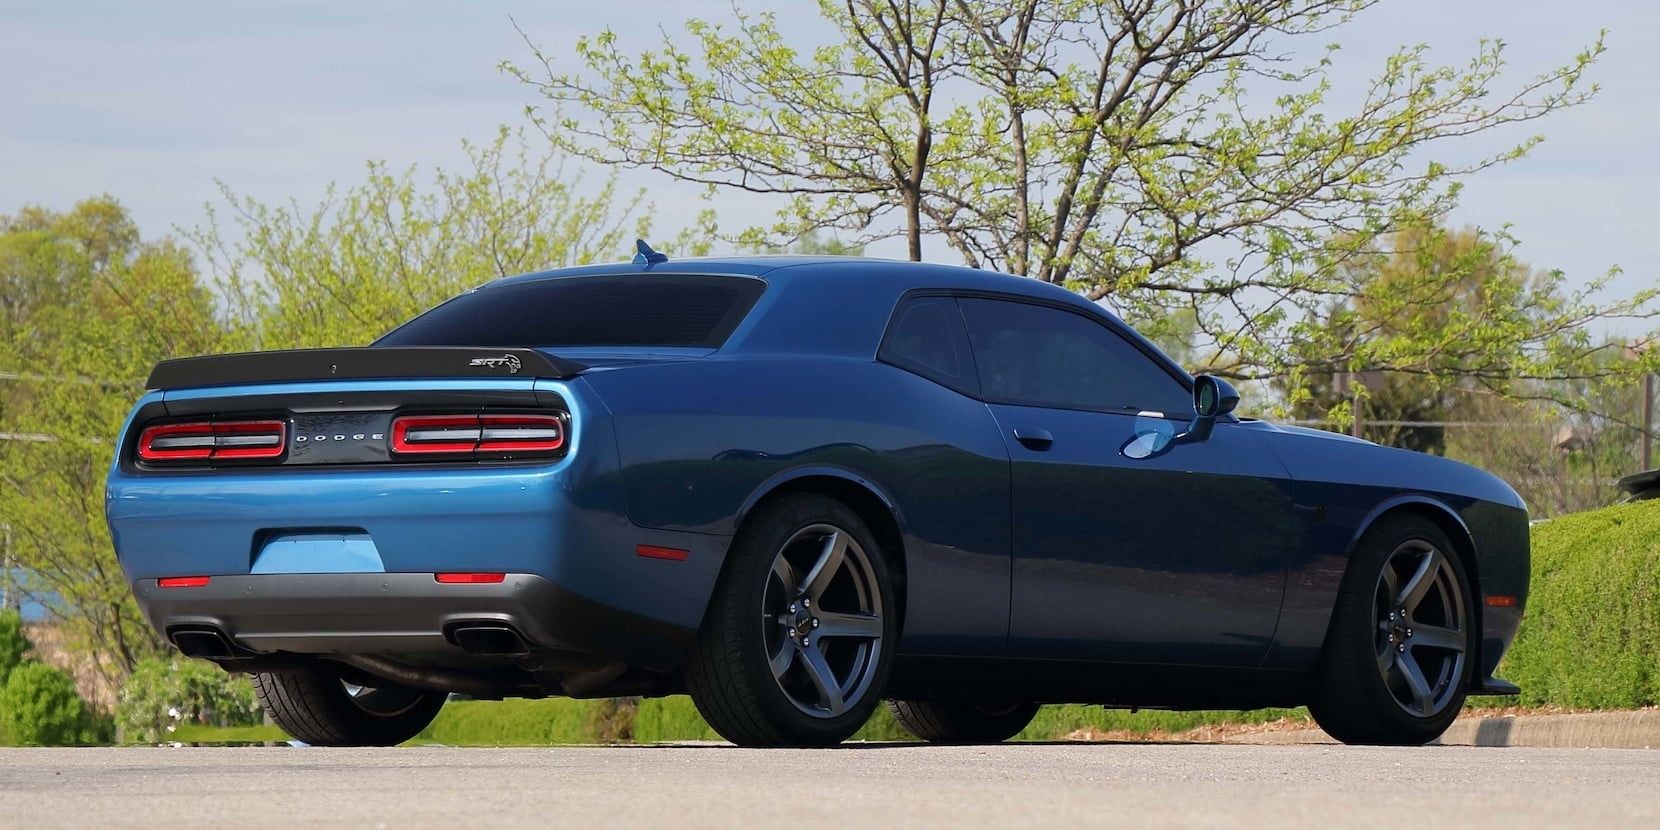 2021 Dodge Challenger Hellcat 2 cropped